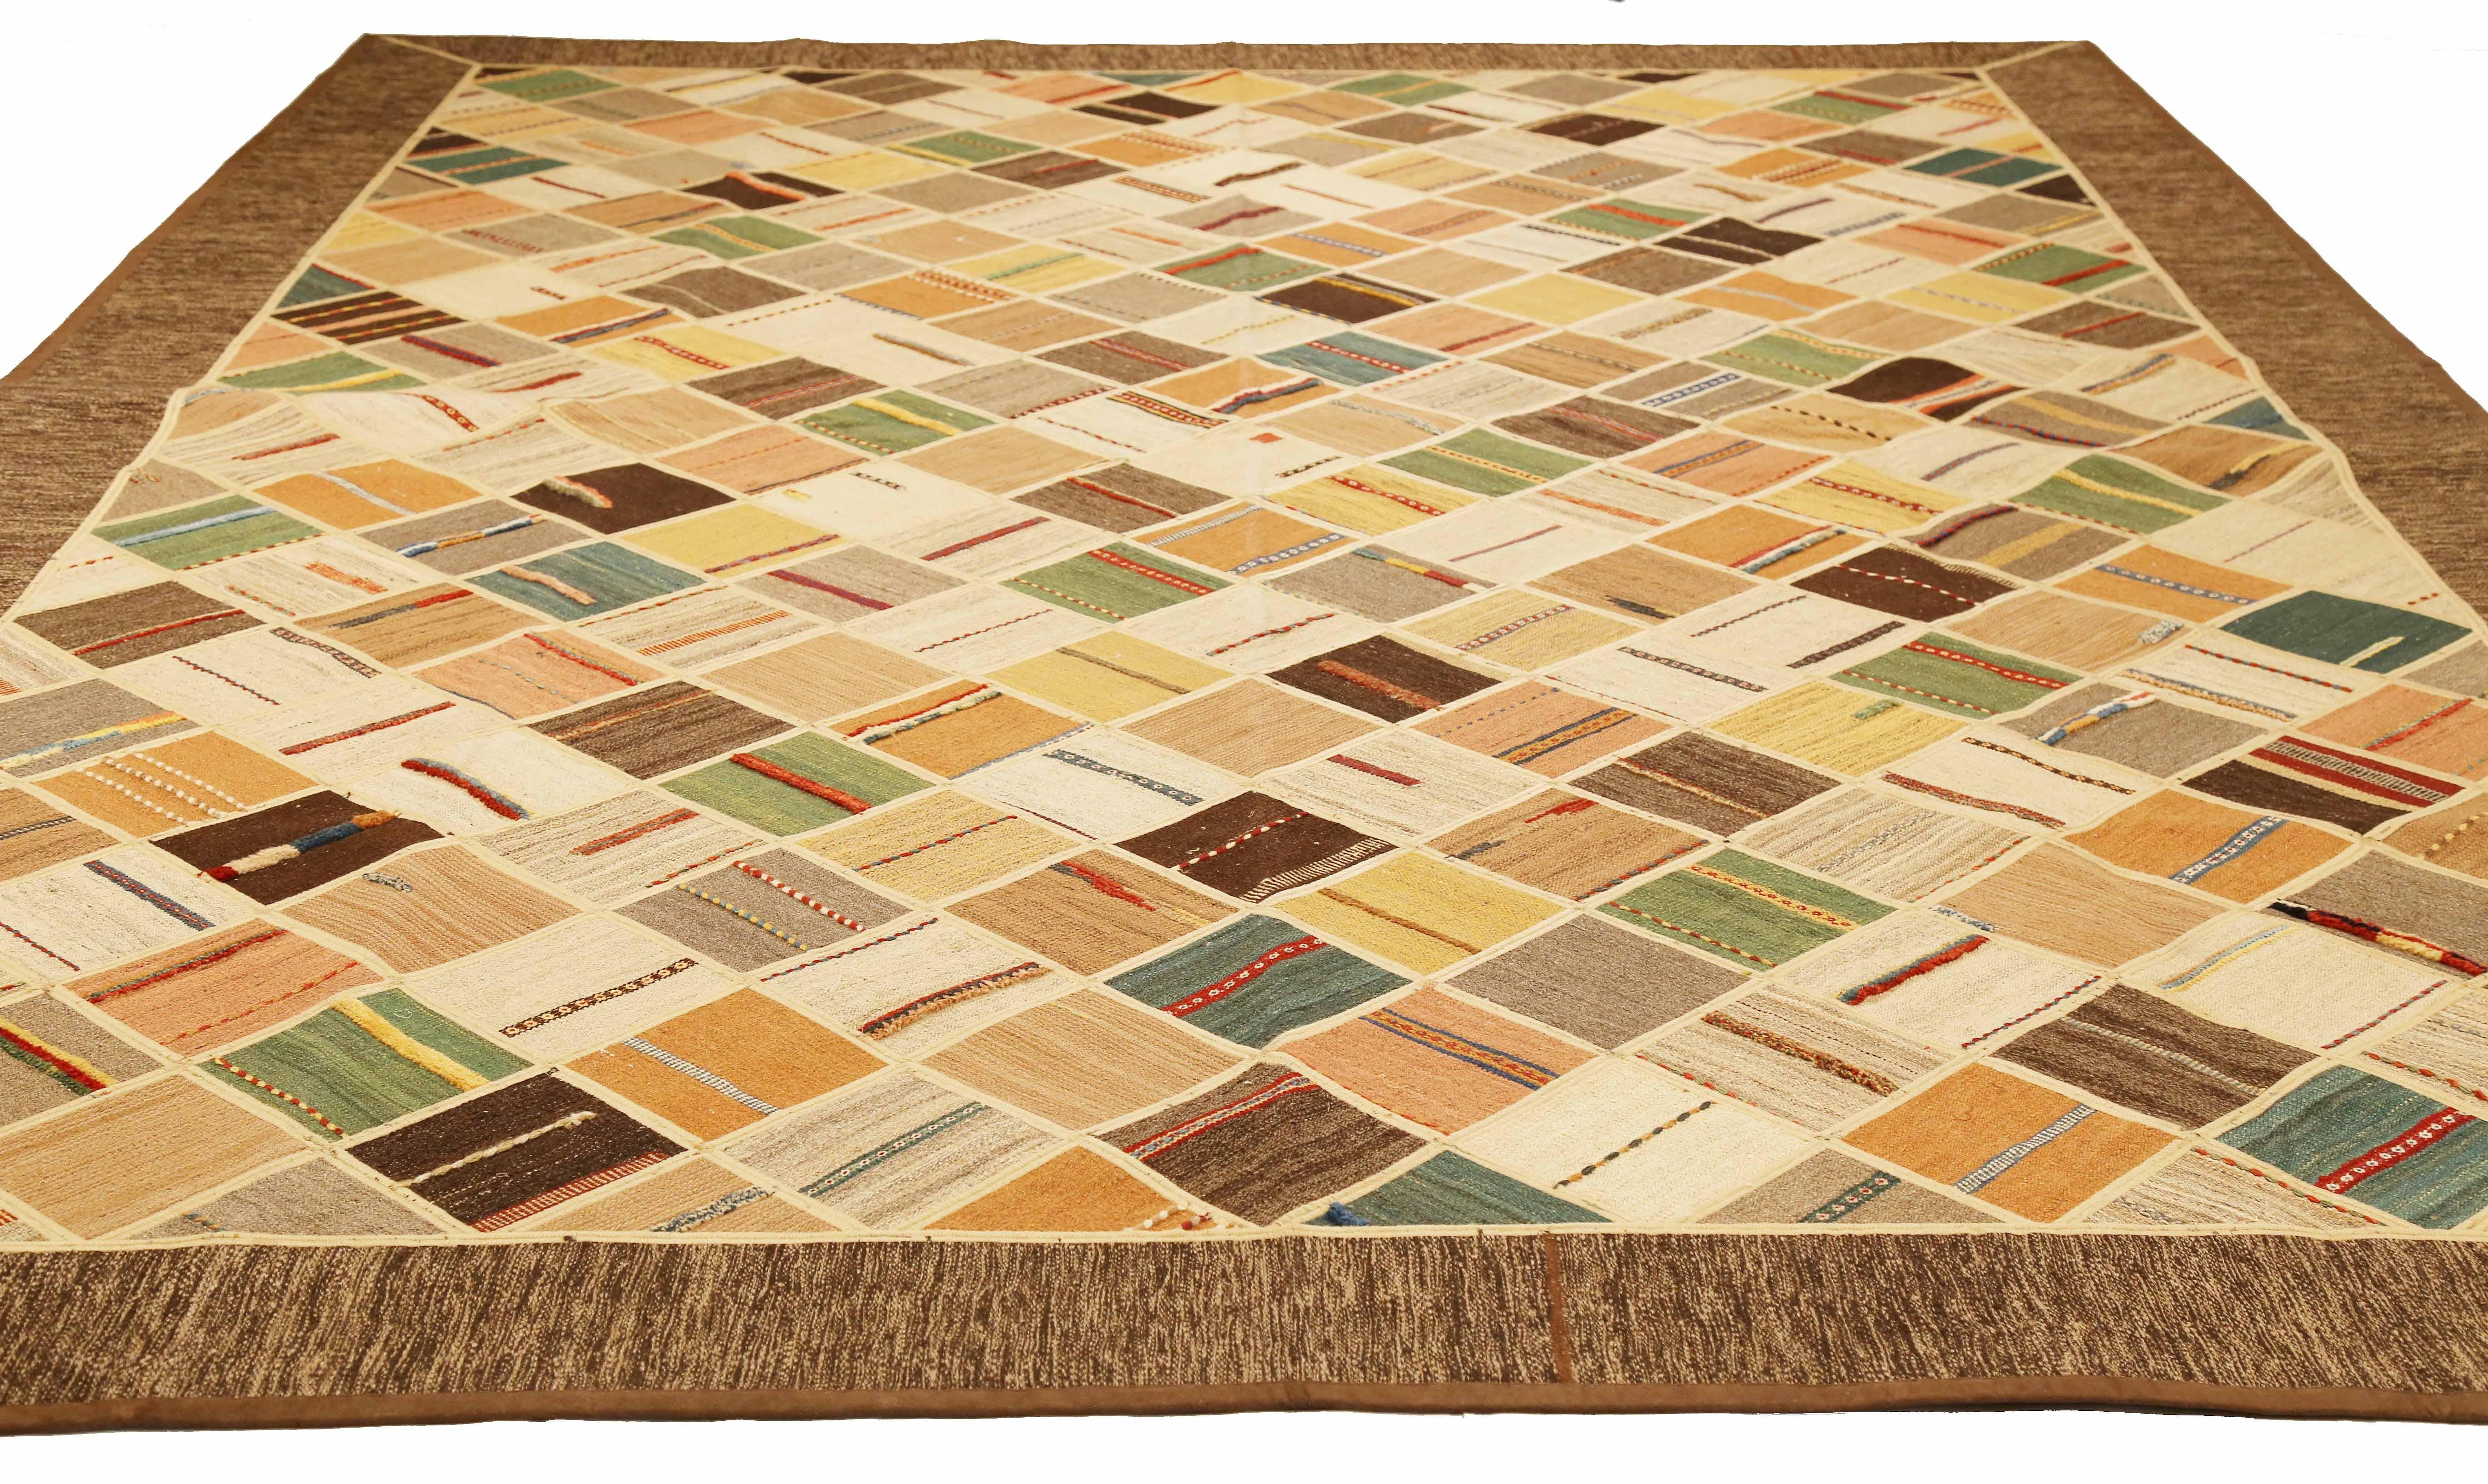 Modern Turkish rug handwoven from the finest sheep’s wool and colored with all-natural vegetable dyes that are safe for humans and pets. It’s a traditional Patch Kilim flat-weave design featuring vibrant and colorful diagonal tile patterns on a